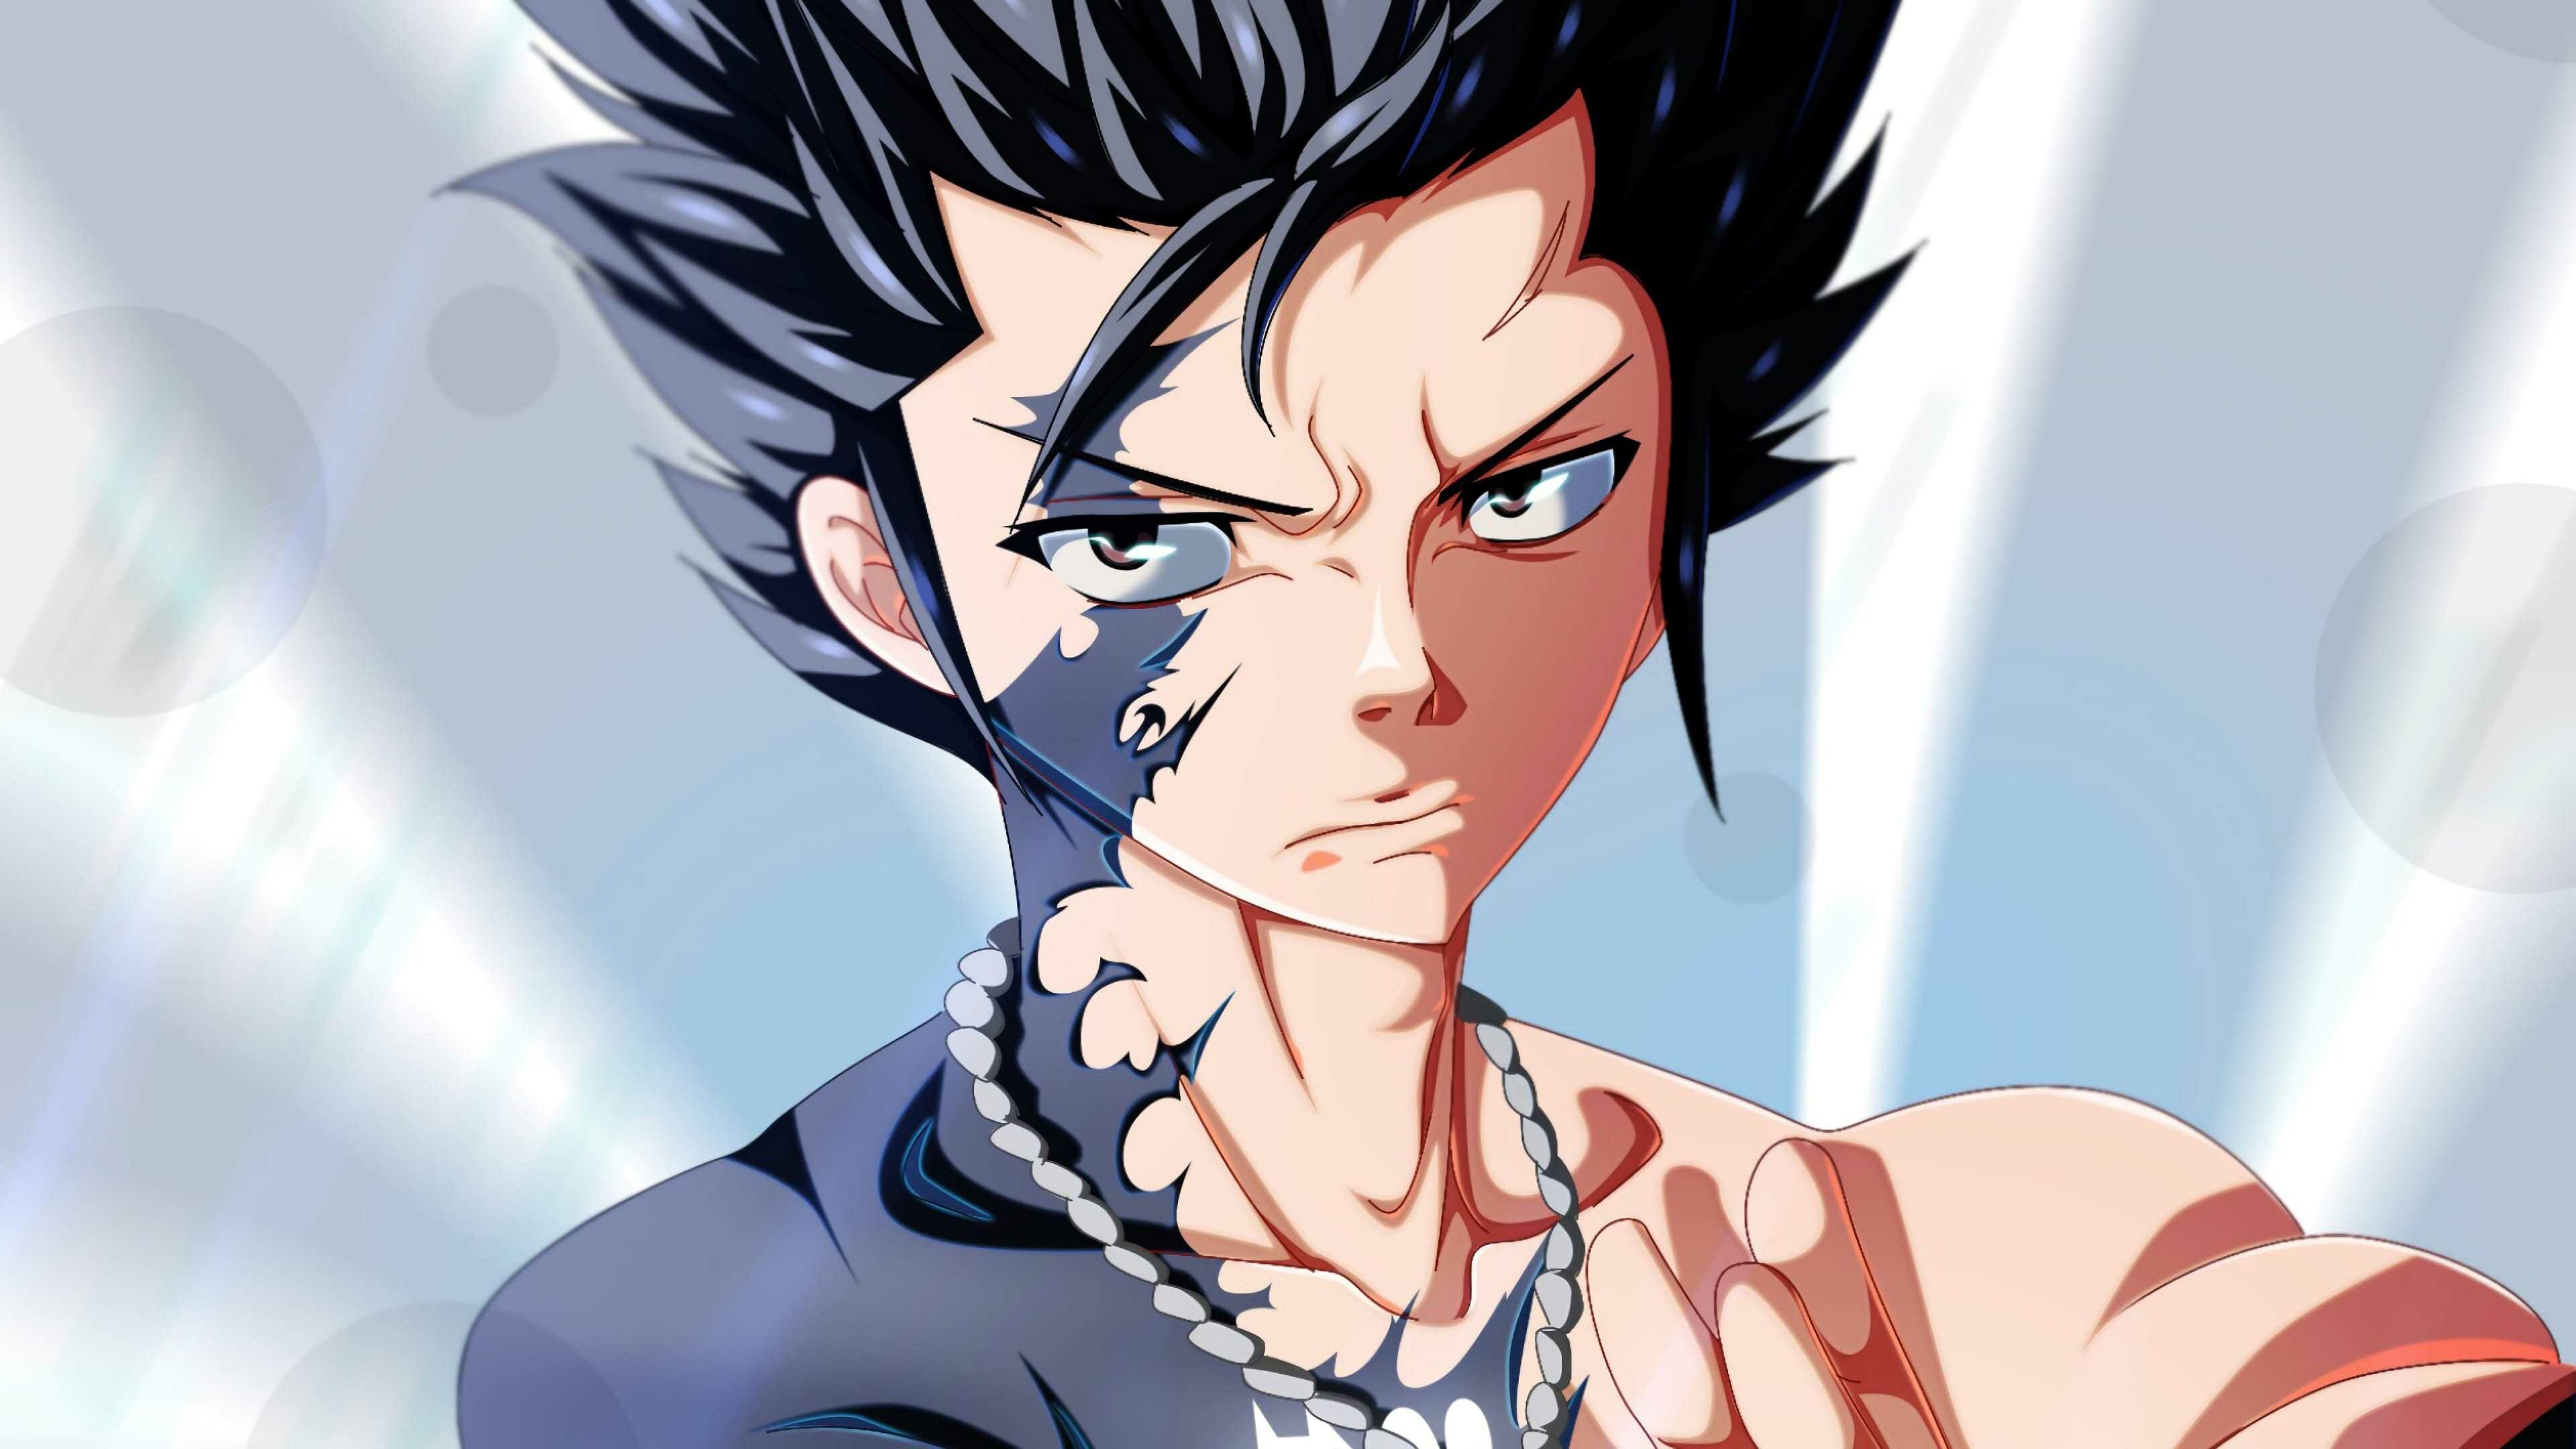 Fairy Tail: Gray Fullbuster, was ranked first in "Meredy's Most Important People to Kill" list. 3840x2160 4K Background.